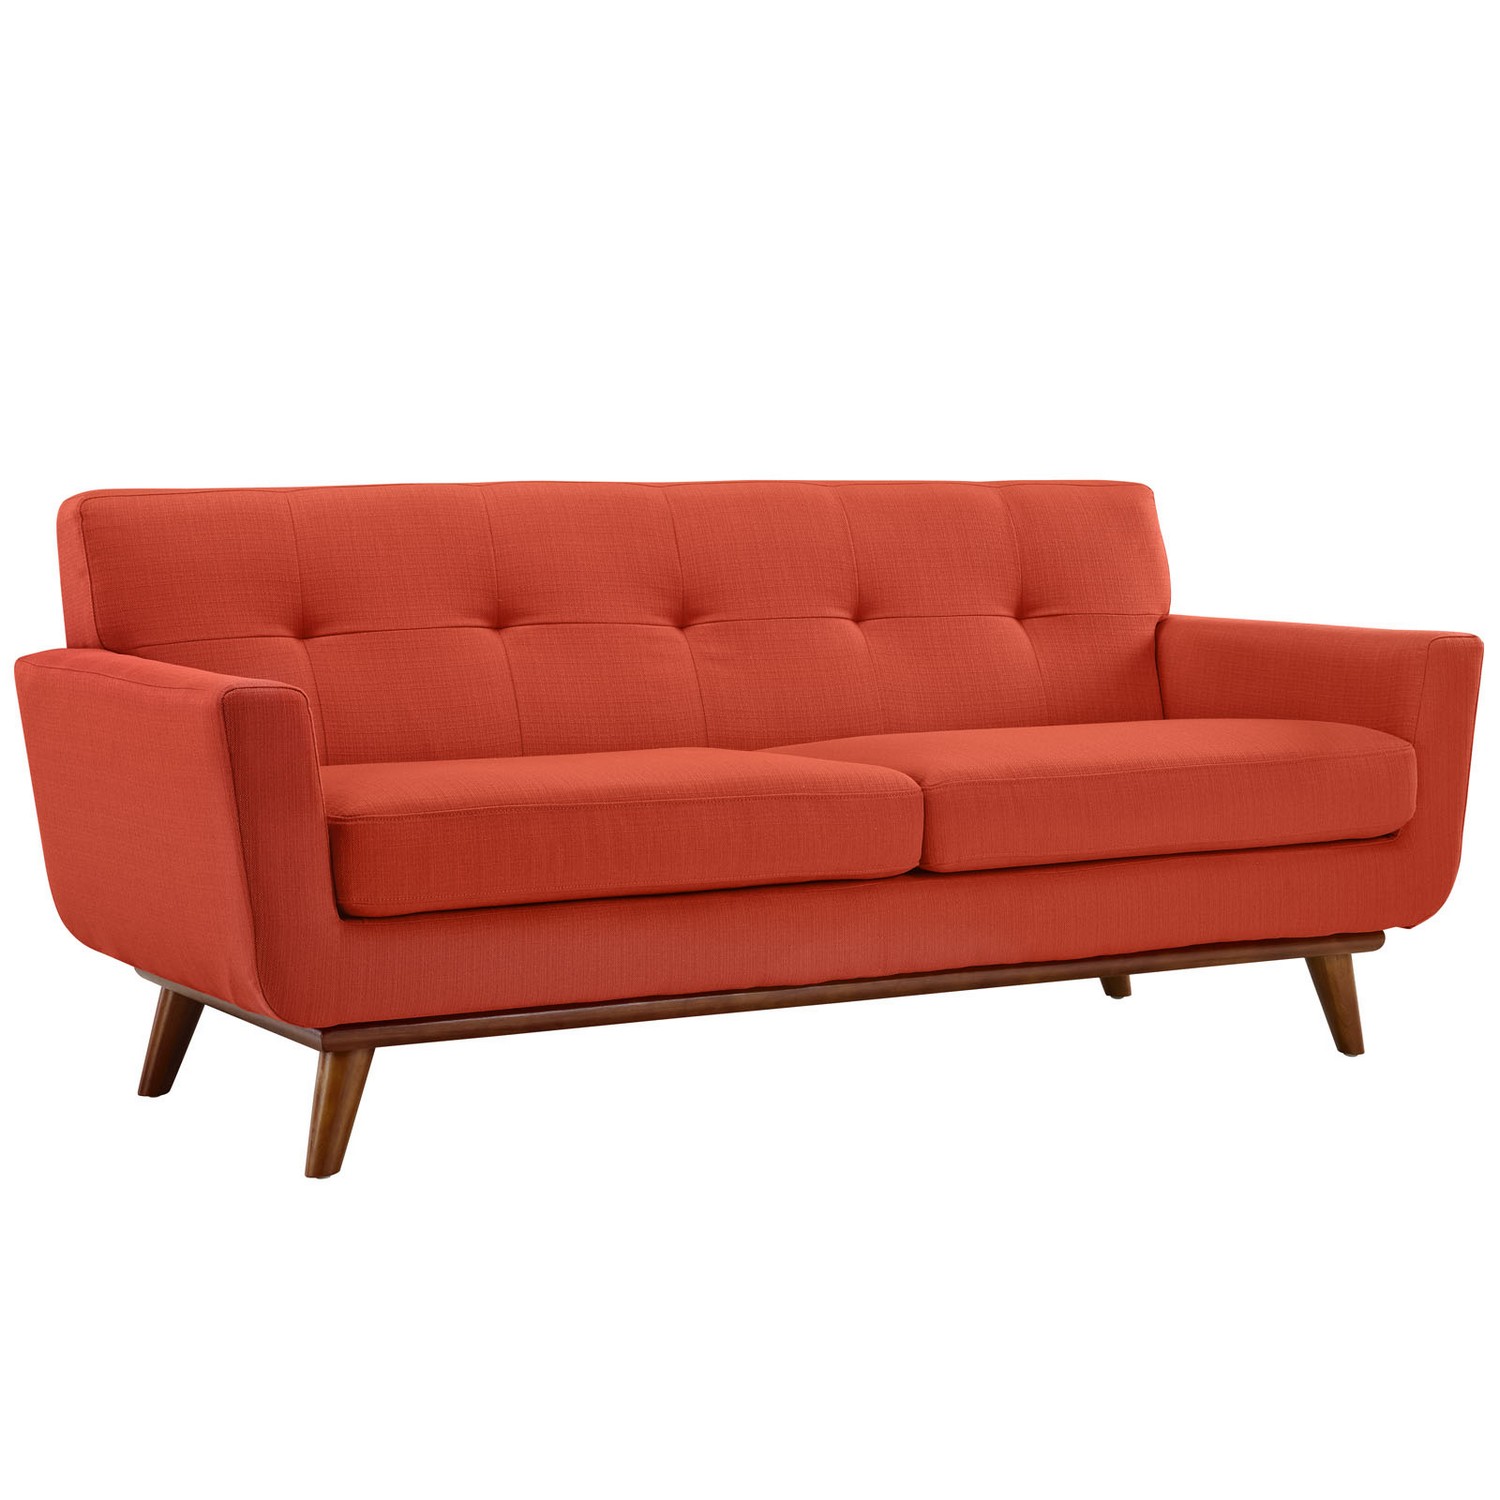 Modway Engage 3 PC Sofa Loveseat and Armchair Set - Atomic Red